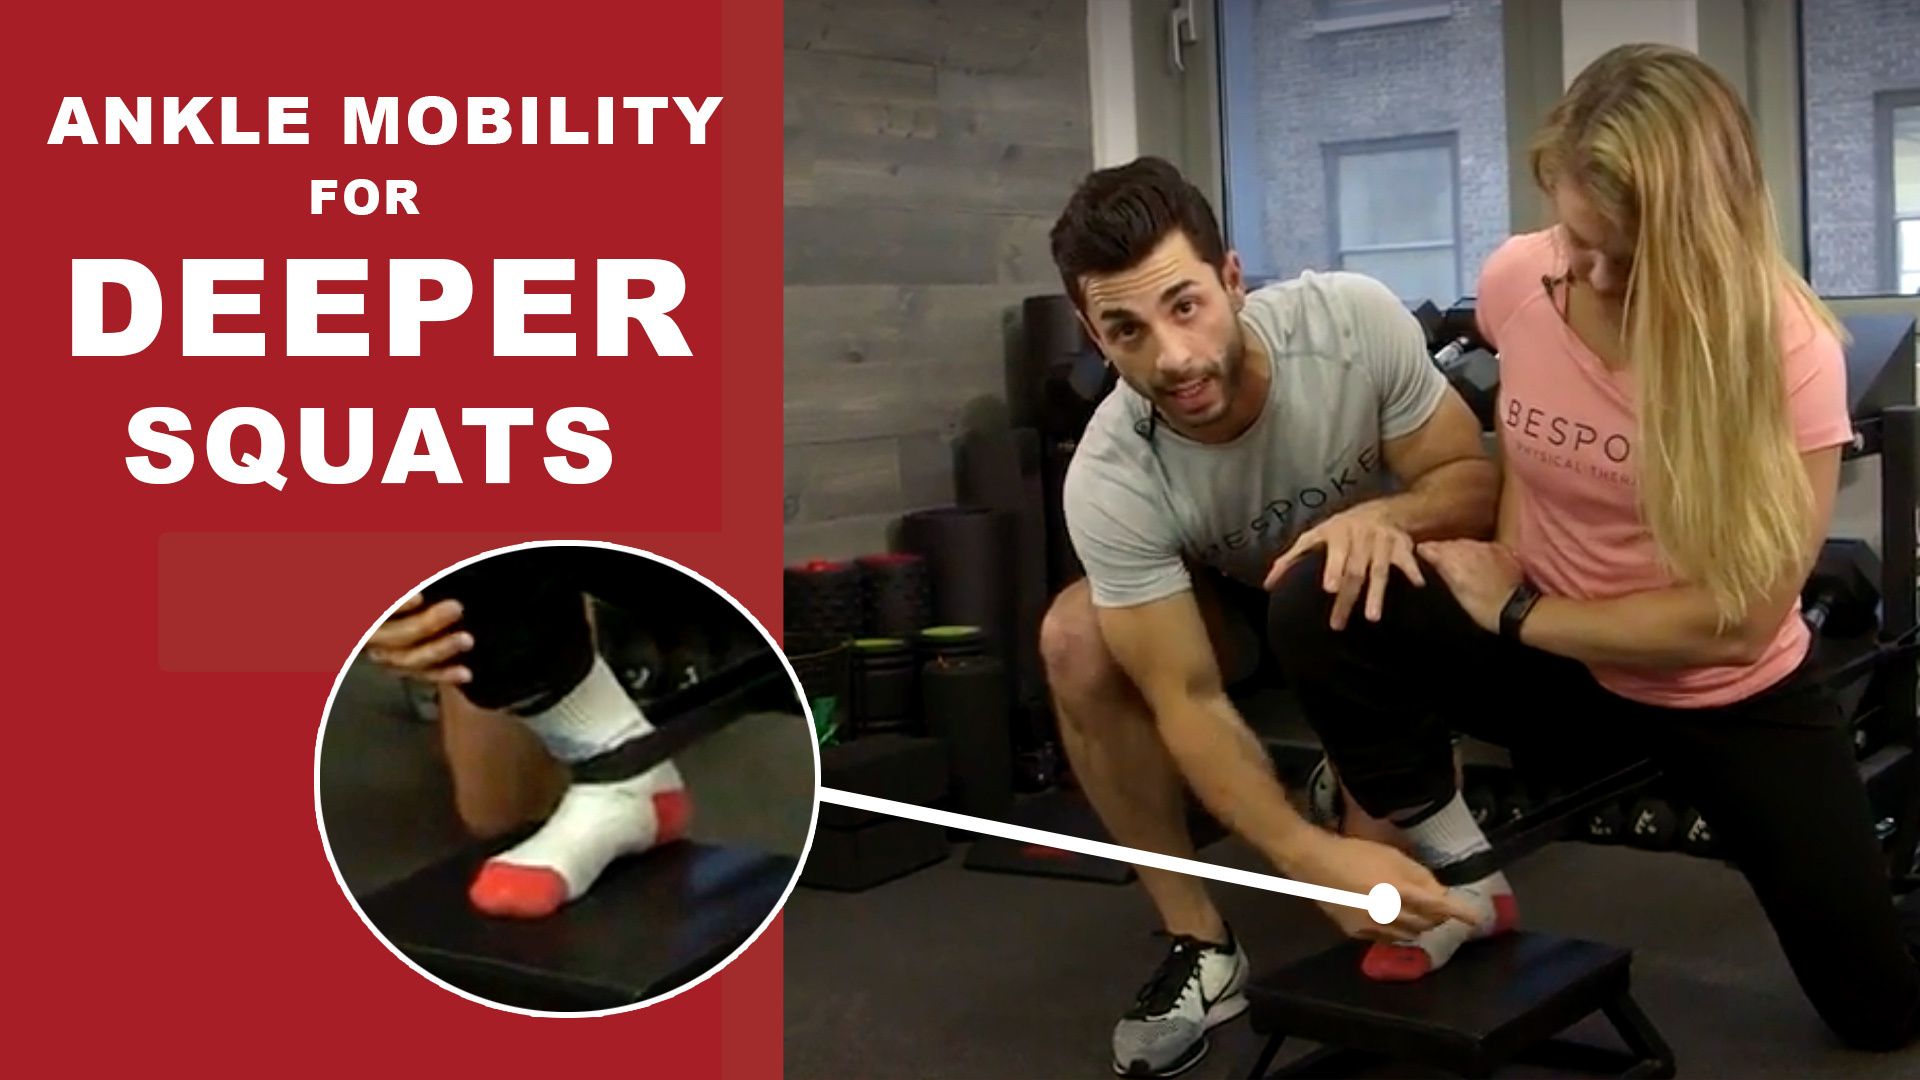 10 Ankle Mobility Exercises to Reduce Foot Pain and Injury